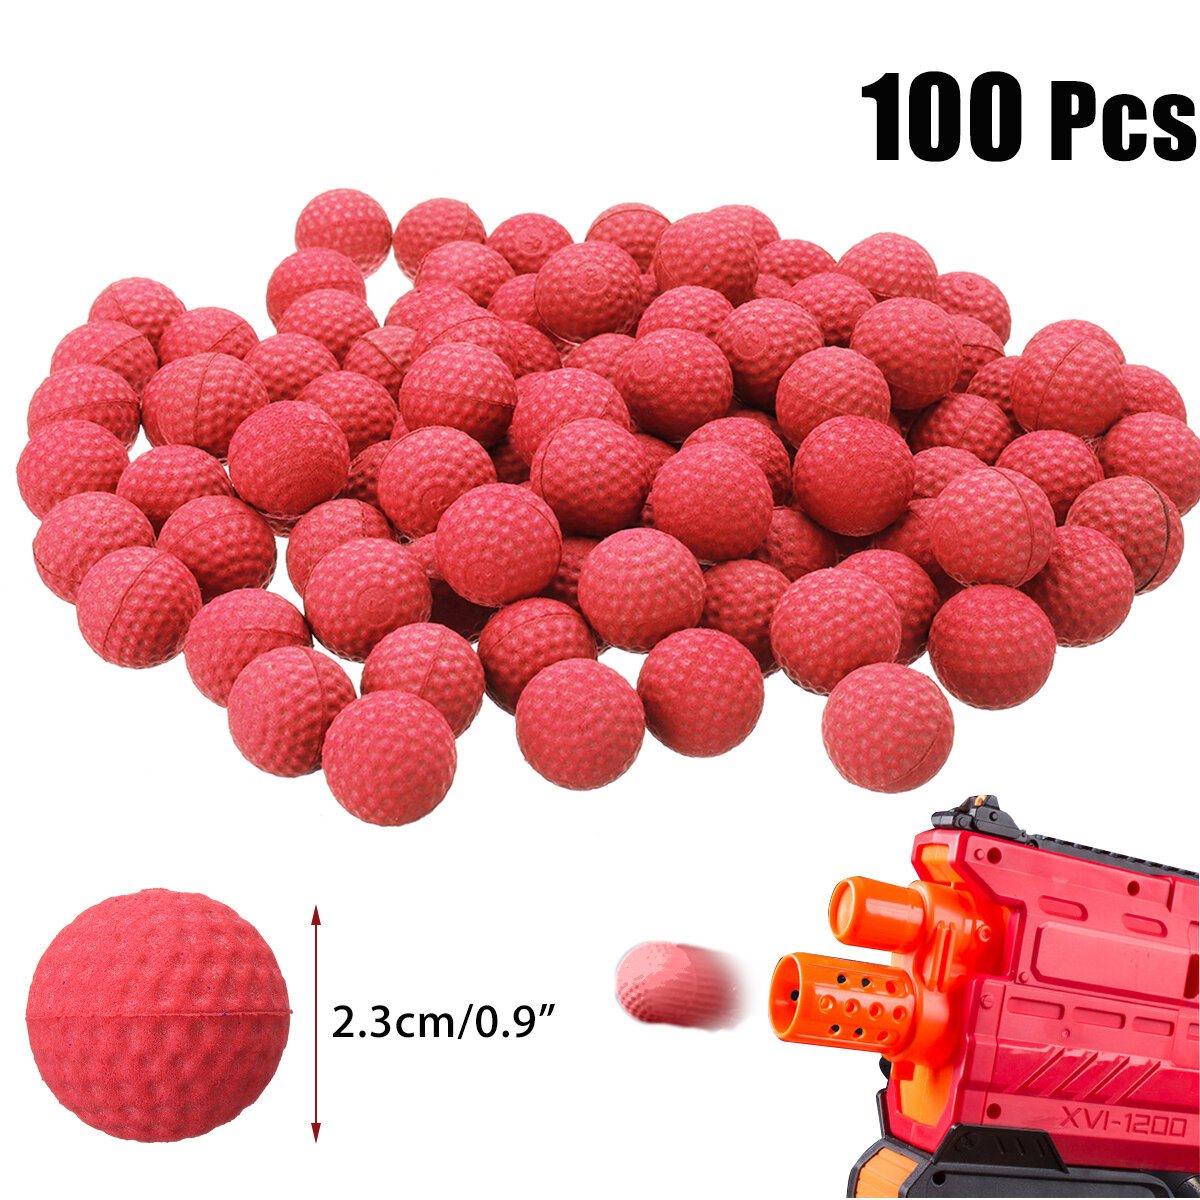 

100Pcs 2.3cm PU Buoyancy Rounds Bullet Balls Kids Toy Ball for Hunting Garden